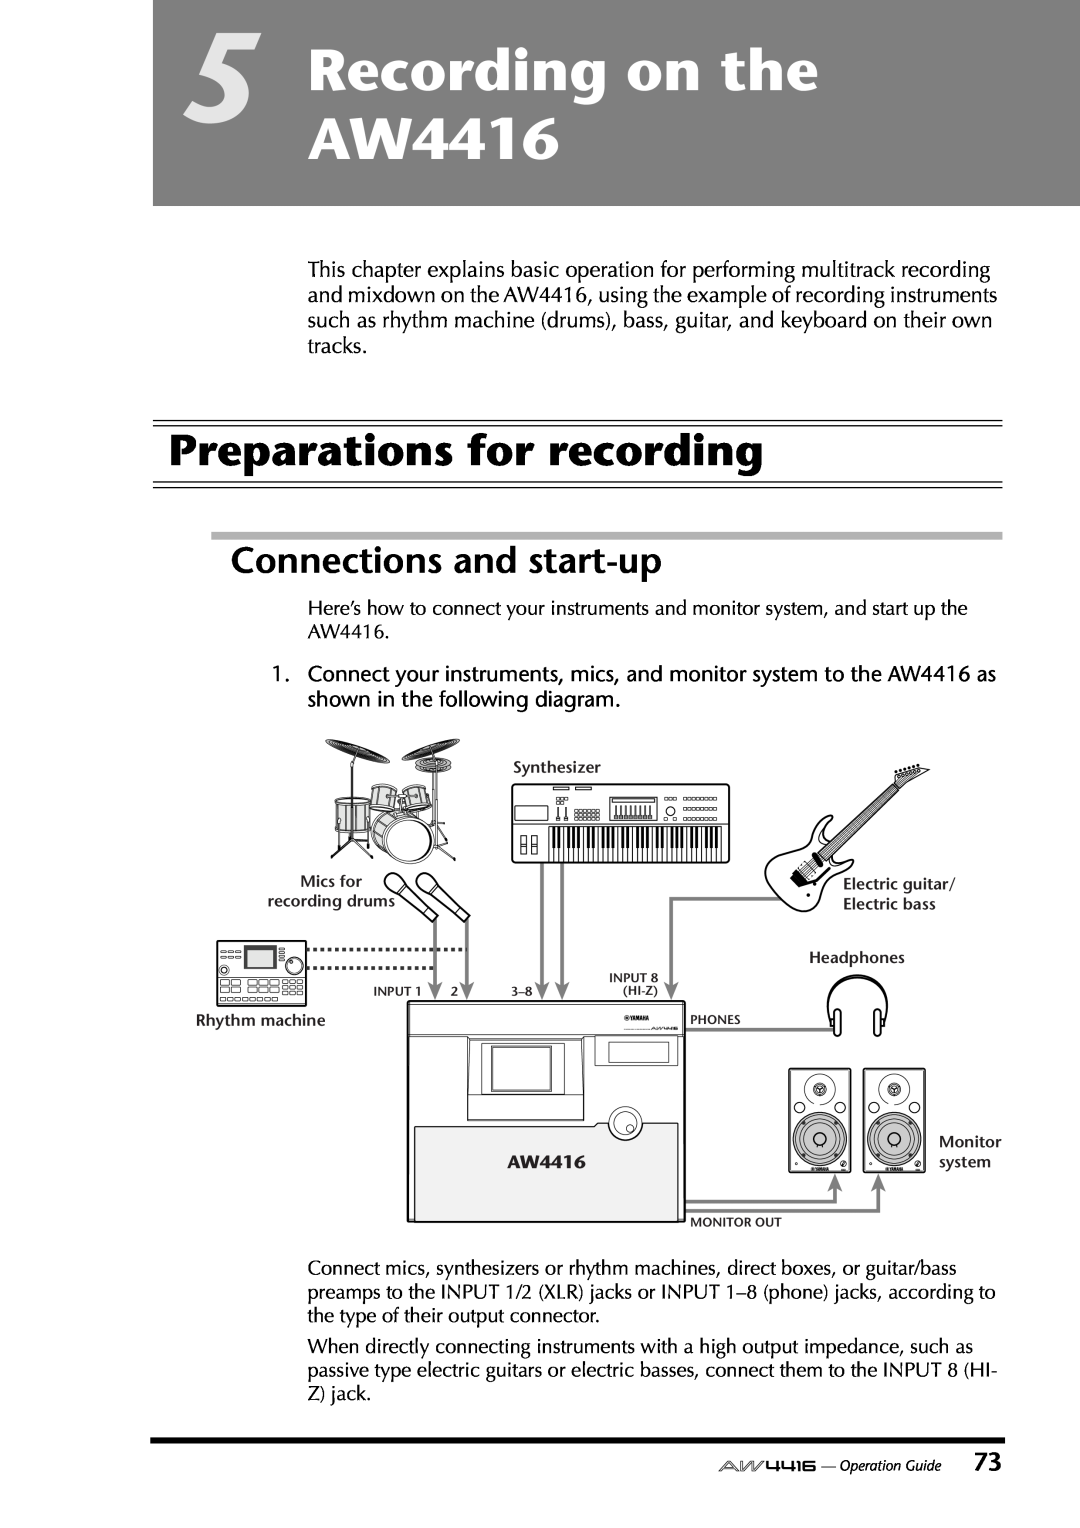 Yamaha manual RecordingAW4416 on the, Preparations for recording, Connections and start-up 